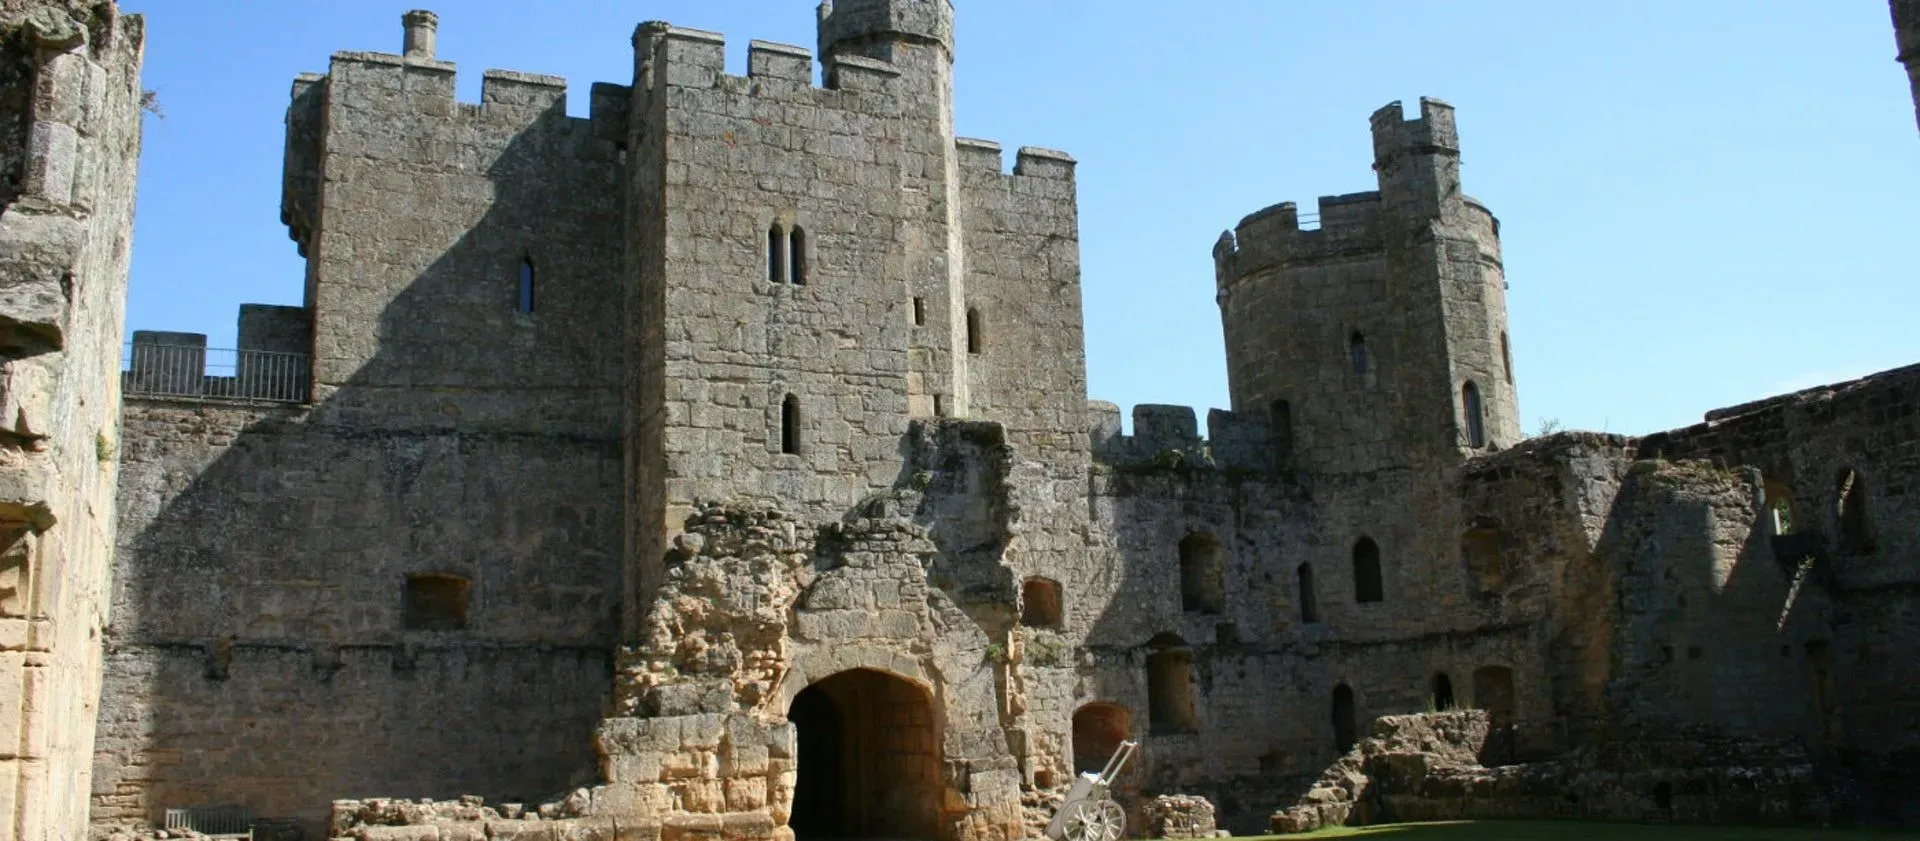 The interior of Bodiam Castle is mostly ruined, but has enough evidence for archaeologists to figure out the layout.